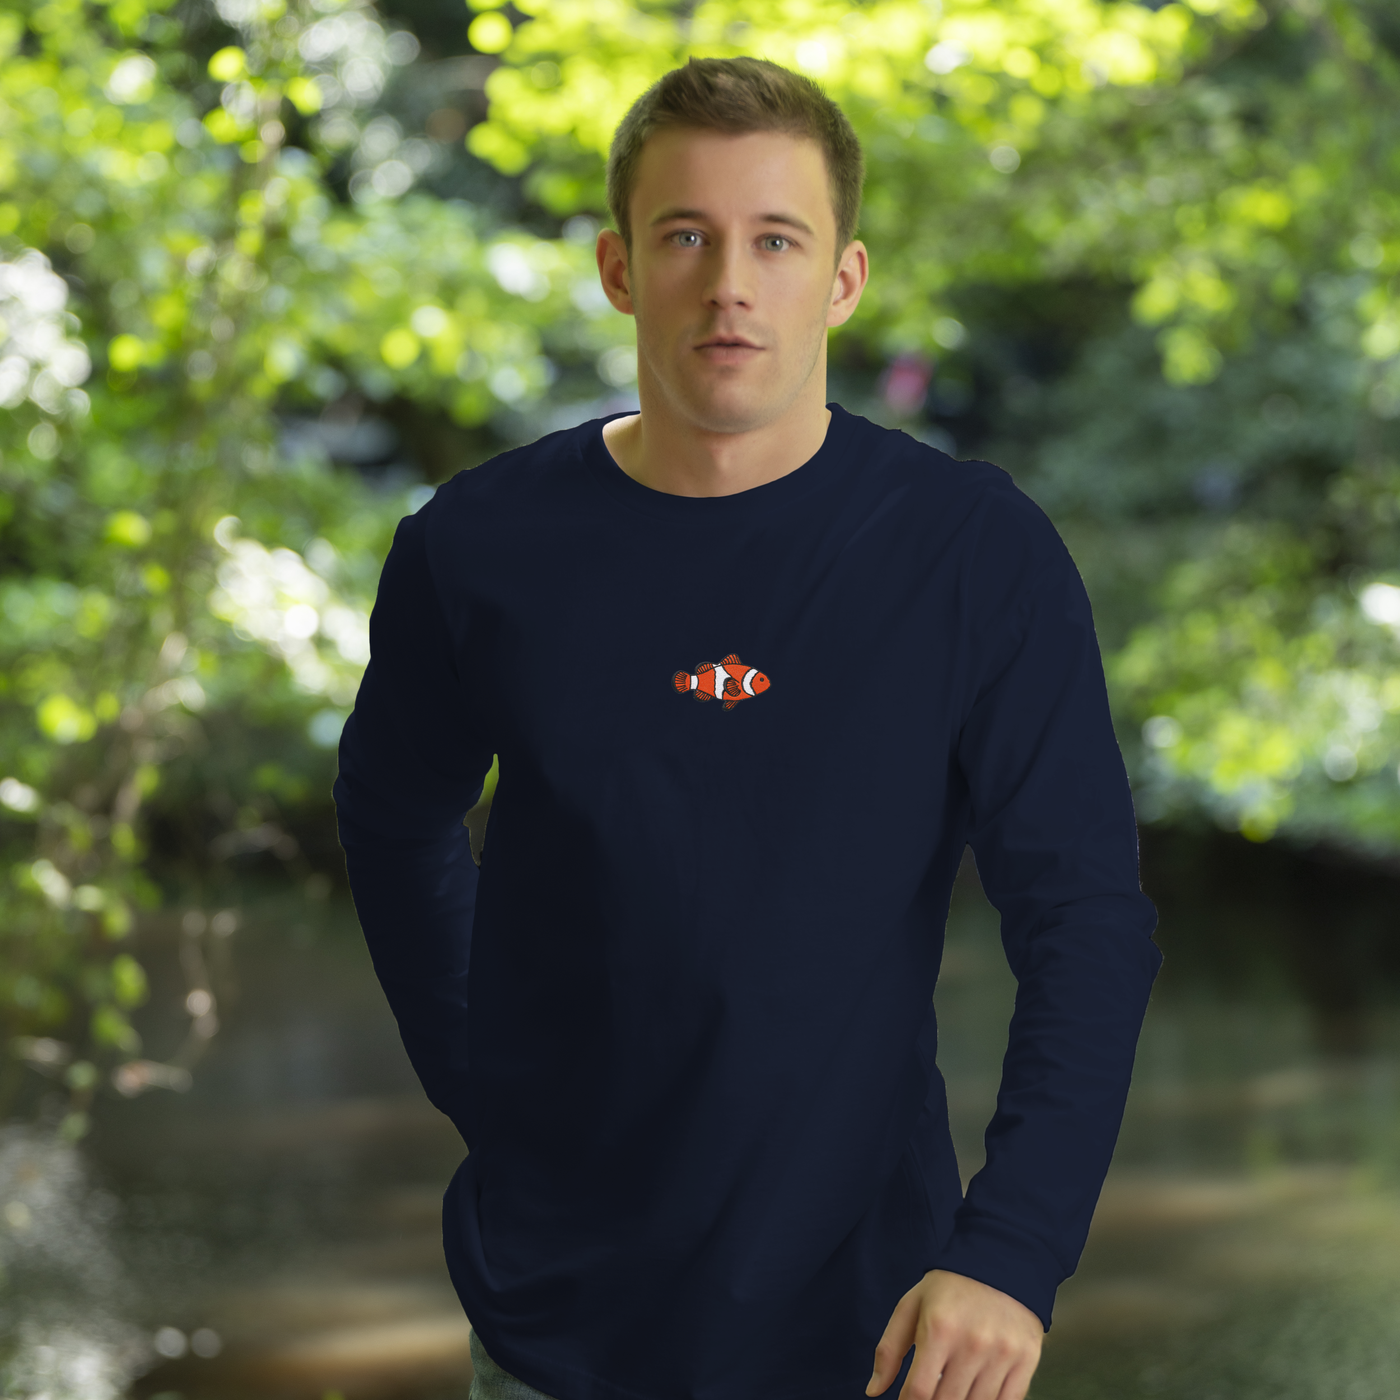 Bobby's Planet Men's Embroidered Clownfish Long Sleeve Shirt from Seven Seas Fish Animals Collection in Navy Color#color_navy